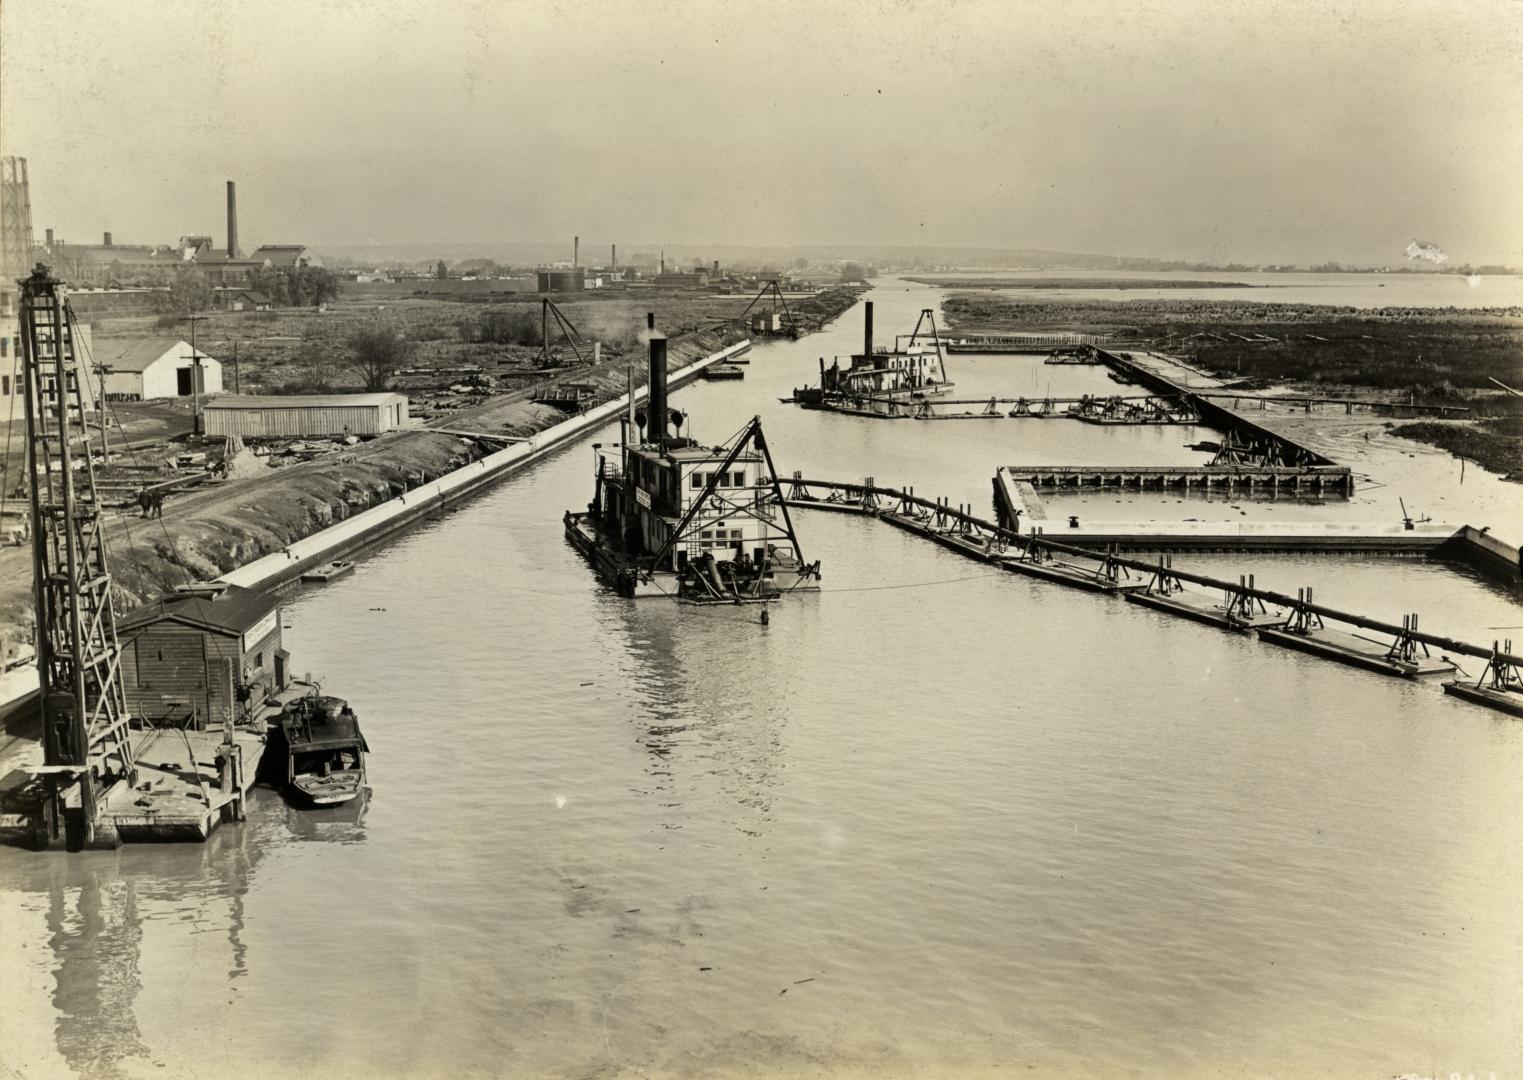 Image shows a channel during construction.